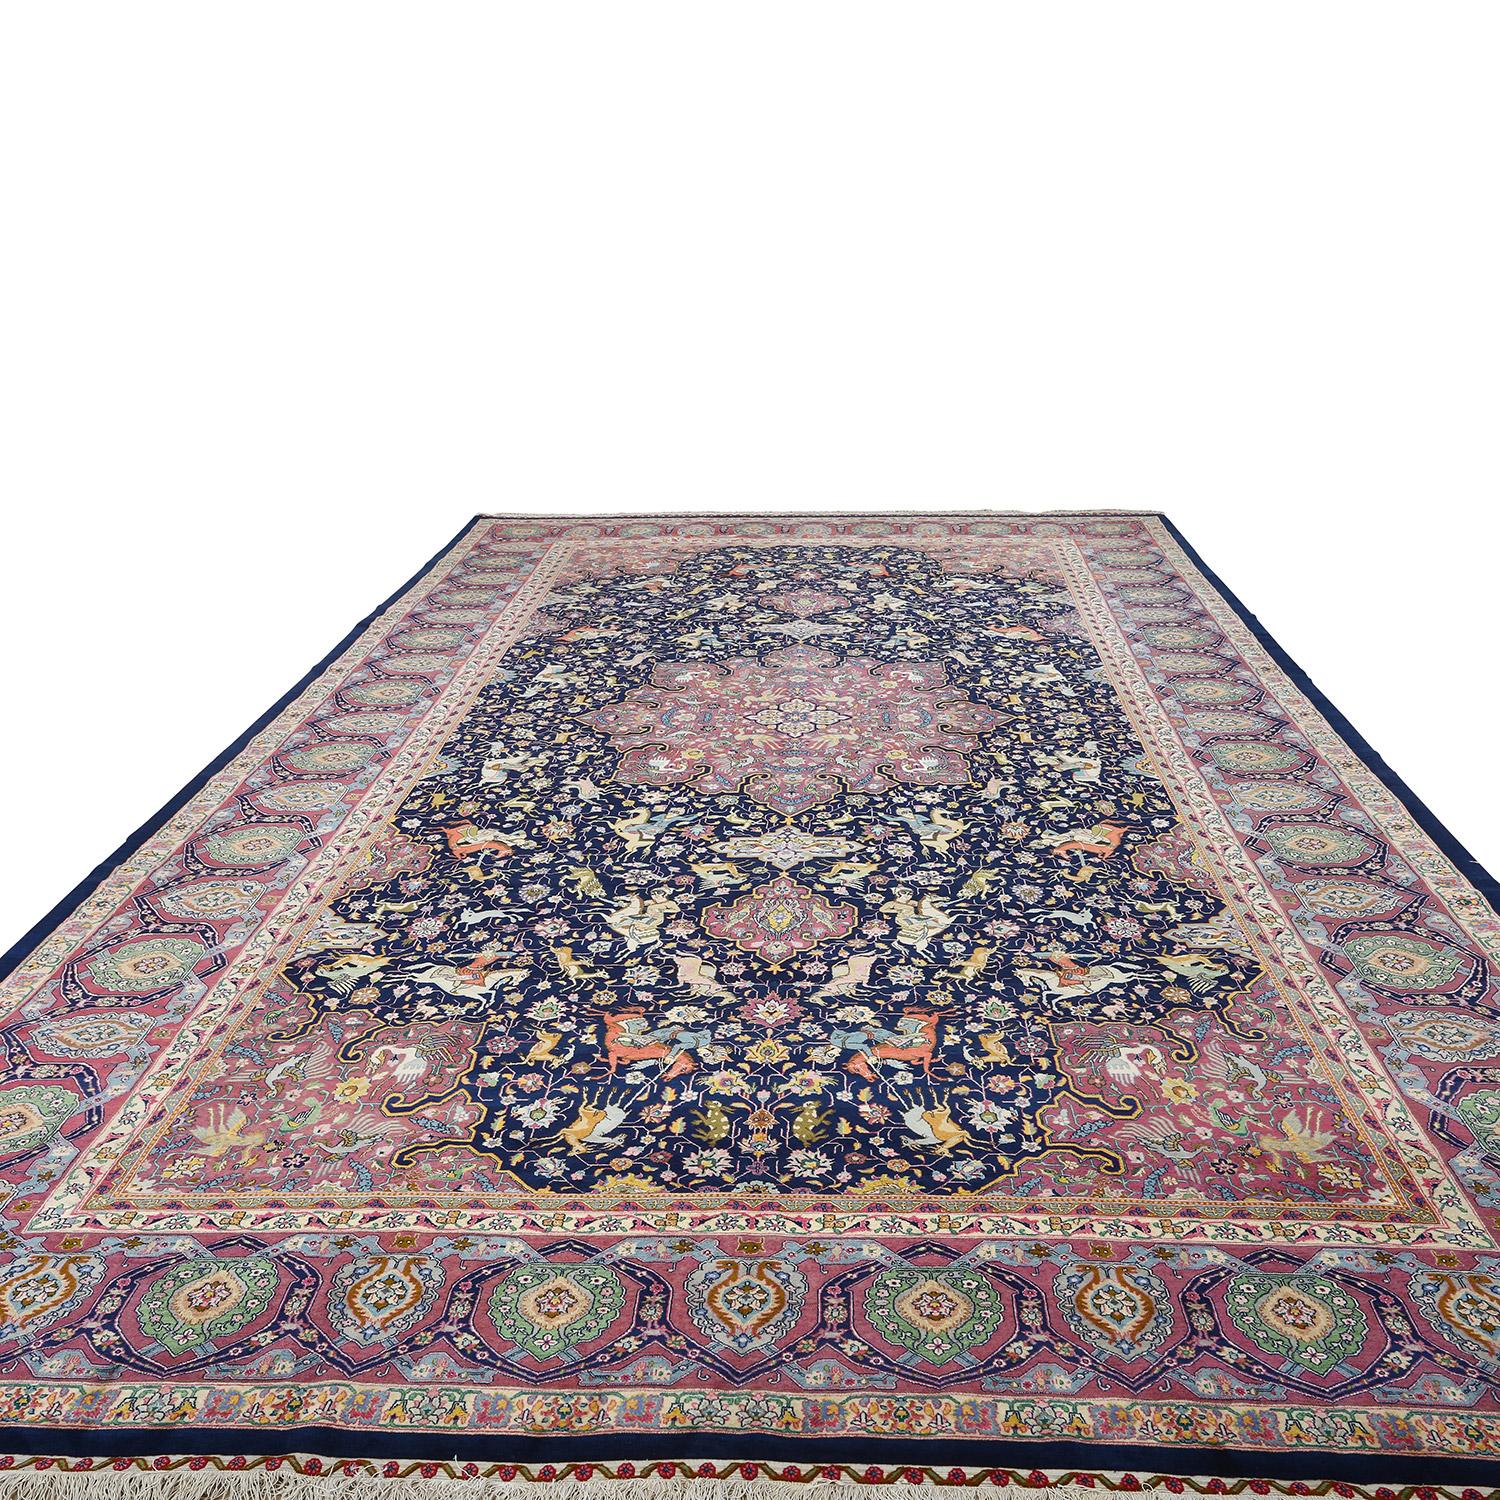 This Tabriz Heydarzadeh Rug, an impressive 16 feet by 9 feet in size, is a true testament to the heights of Persian rug craftsmanship. What makes it even more exceptional is its illustrious provenance, having been meticulously woven by the renowned